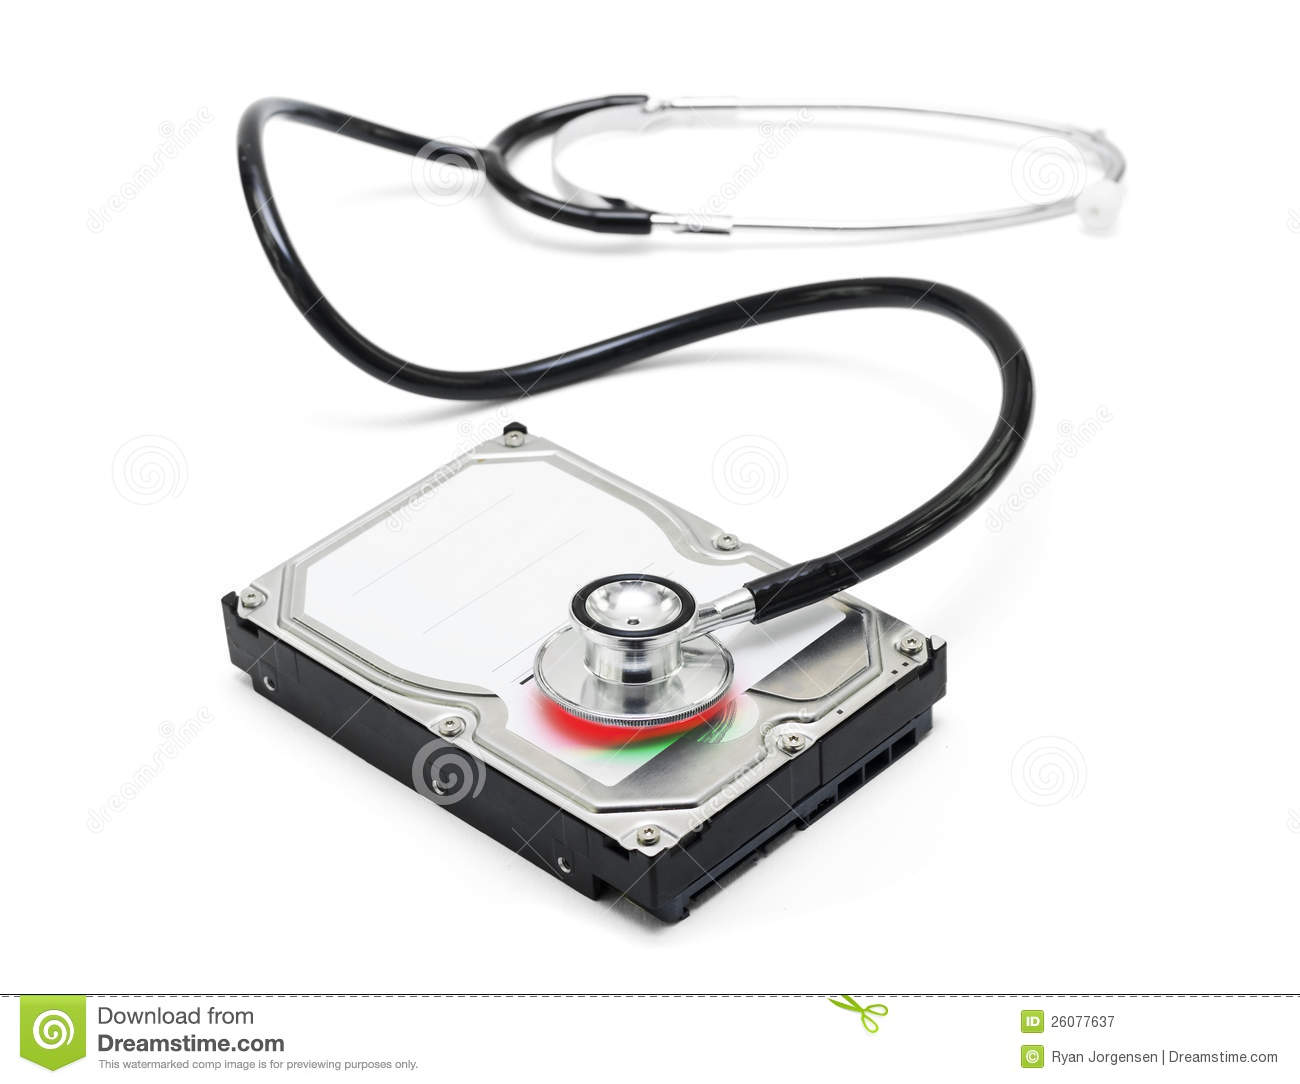     Free Stock Photography  Data Recovery Stethoscope And Hard Drive Disc